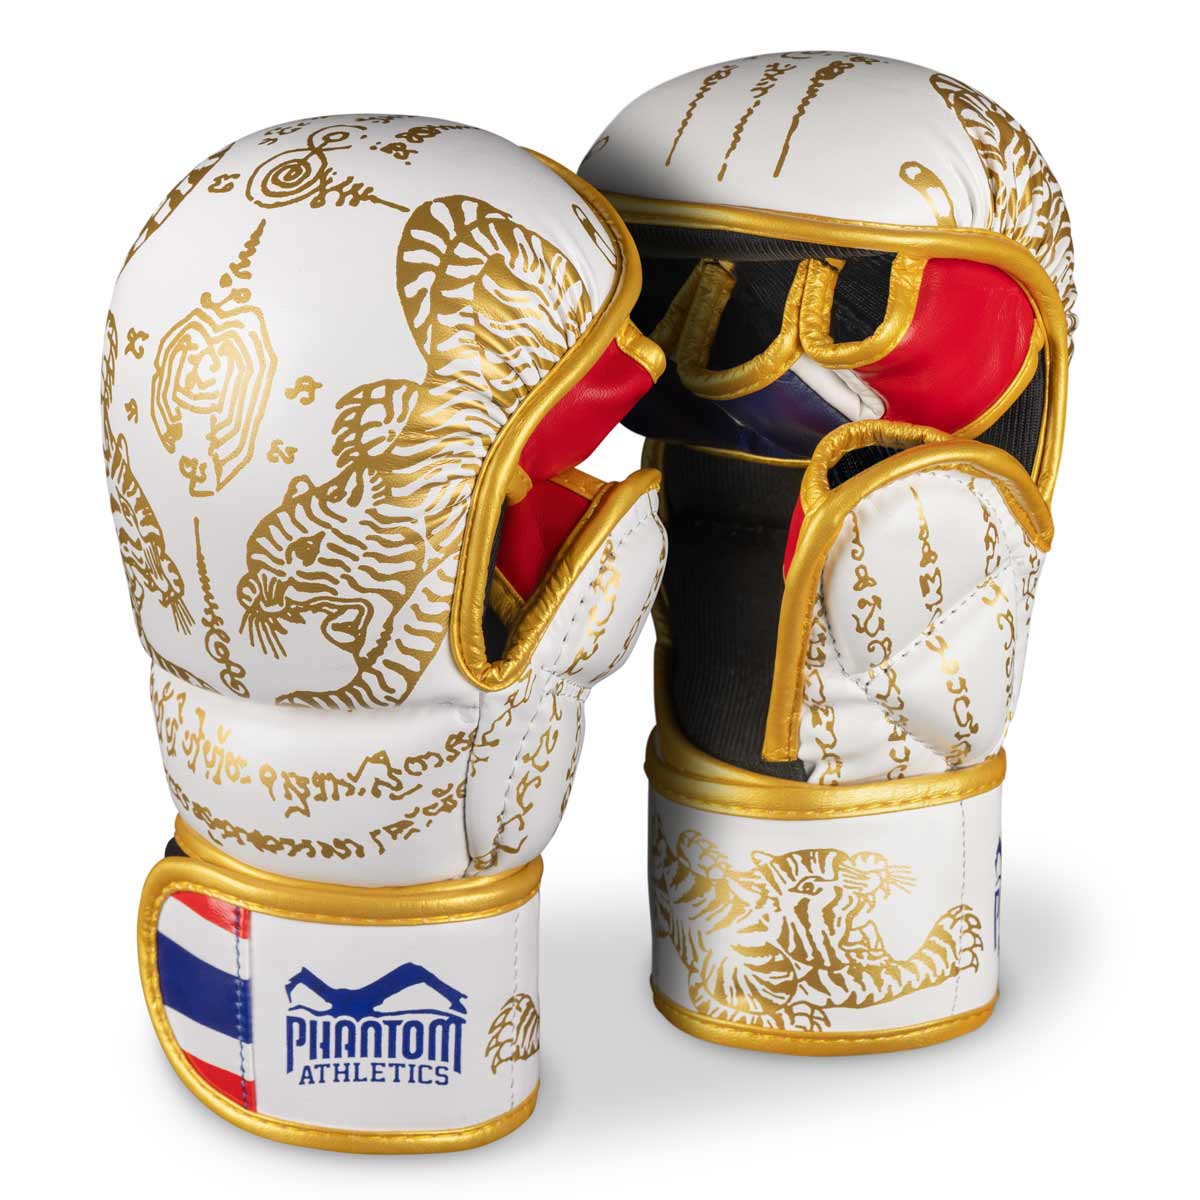 Phantom Muay Thai gloves for Thai boxing and MMA sparring, competition and training. In the traditional Sak Yant design and the color white/gold.